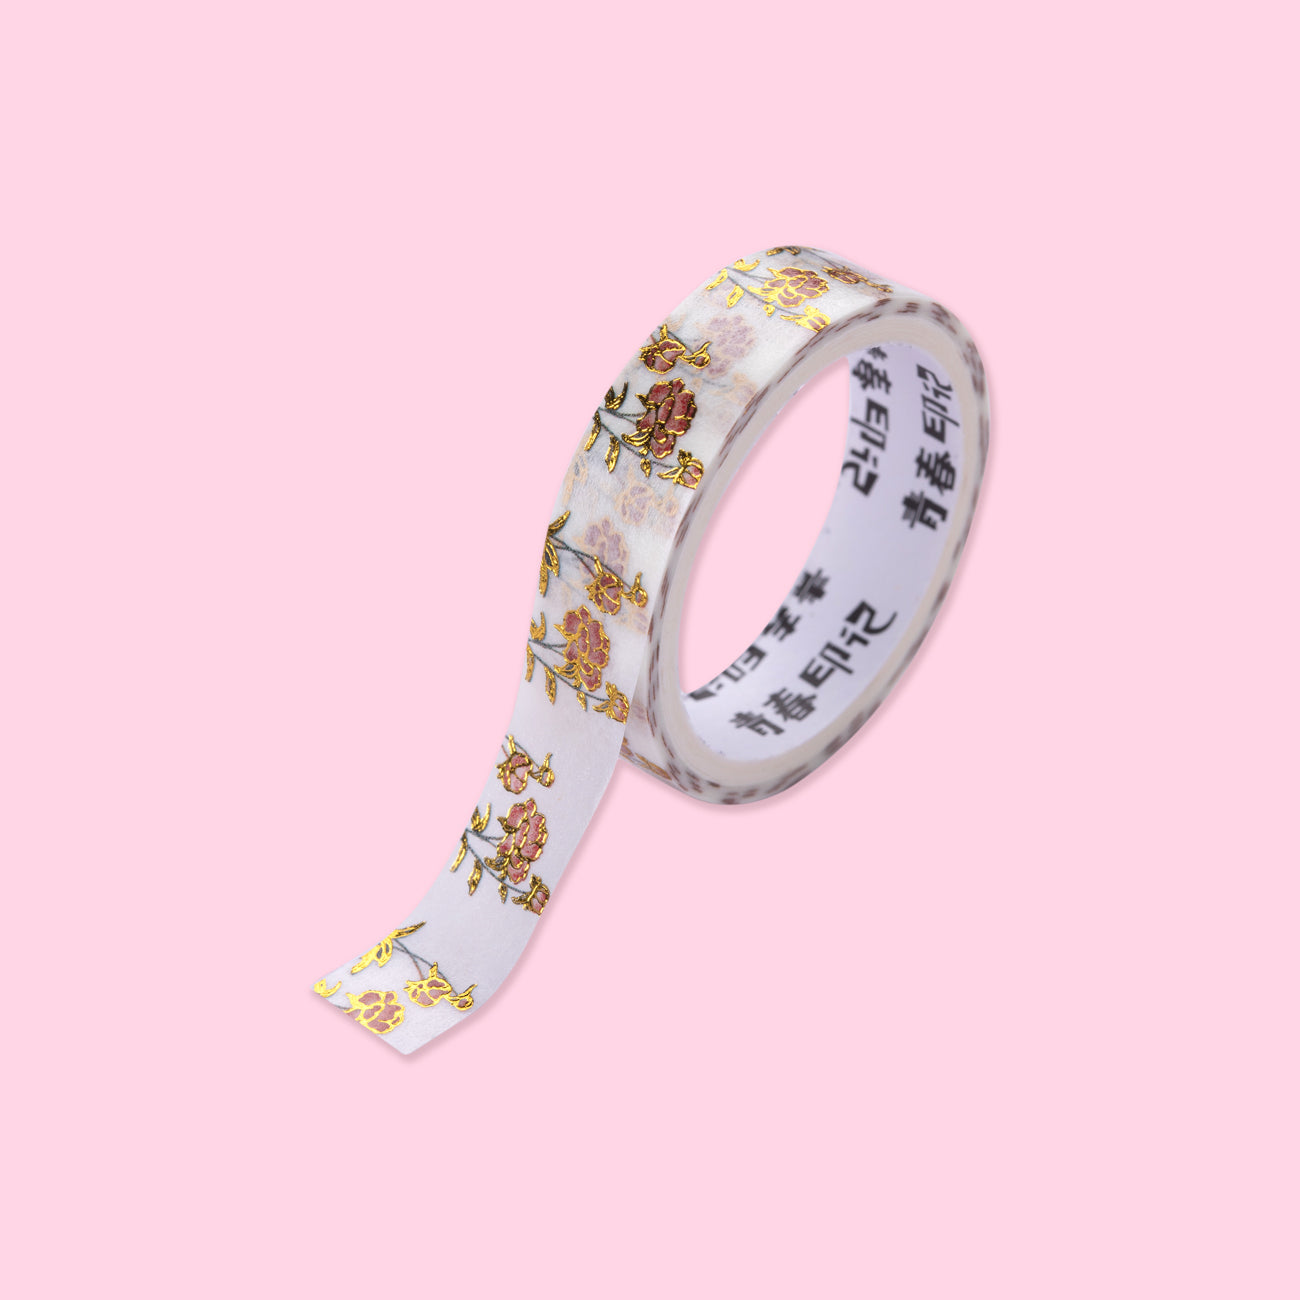 Gold Foil Japanese Retro Washi Tape - Set of 6 - Flower and Bird